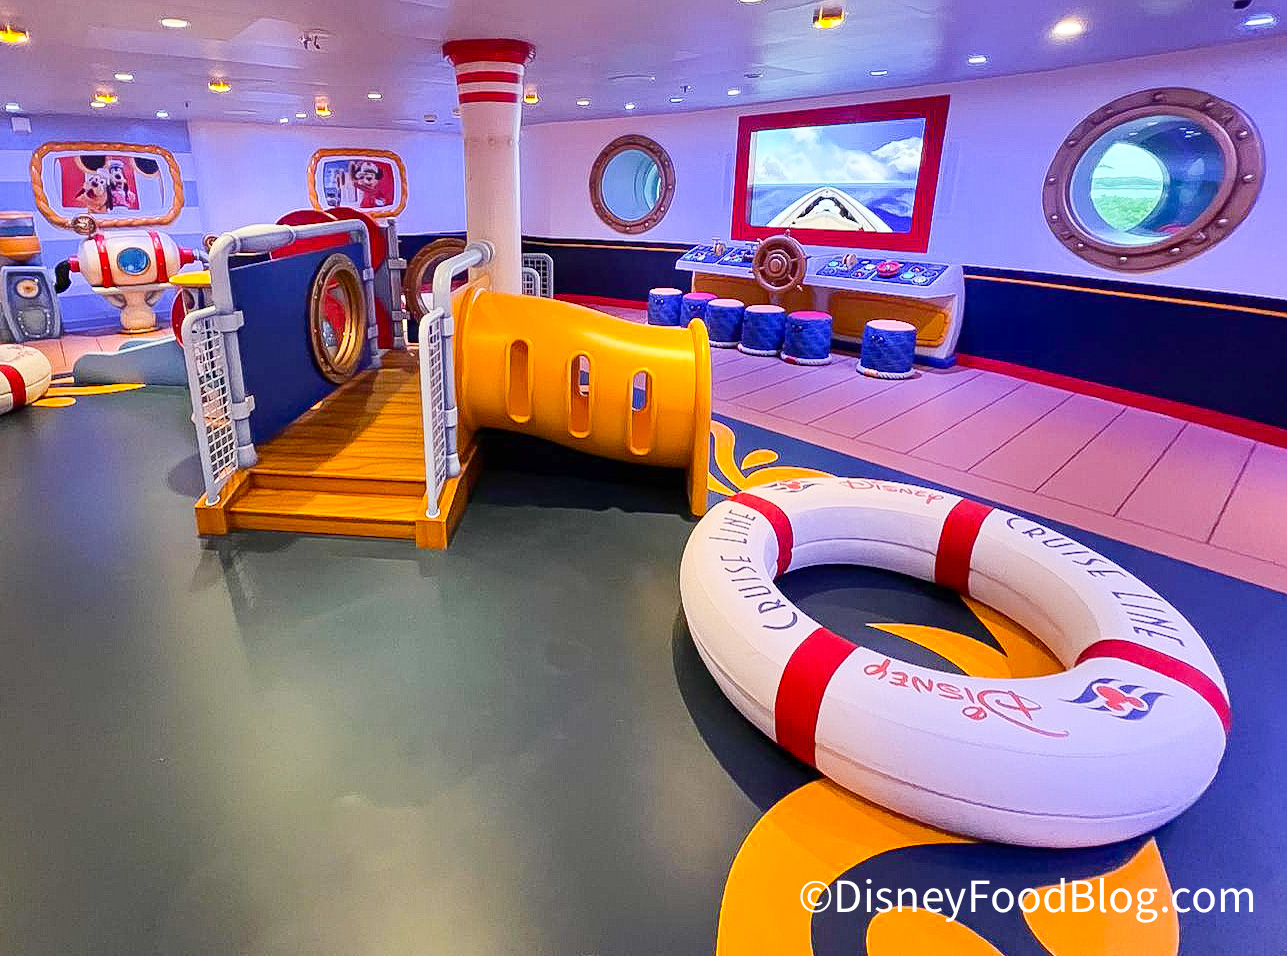 https://www.disneyfoodblog.com/wp-content/uploads/2022/06/2022-dcl-wish-oceaneer-club-kids-club-mickey-and-minnie-captains-deck-play-area-media-cruise.jpg